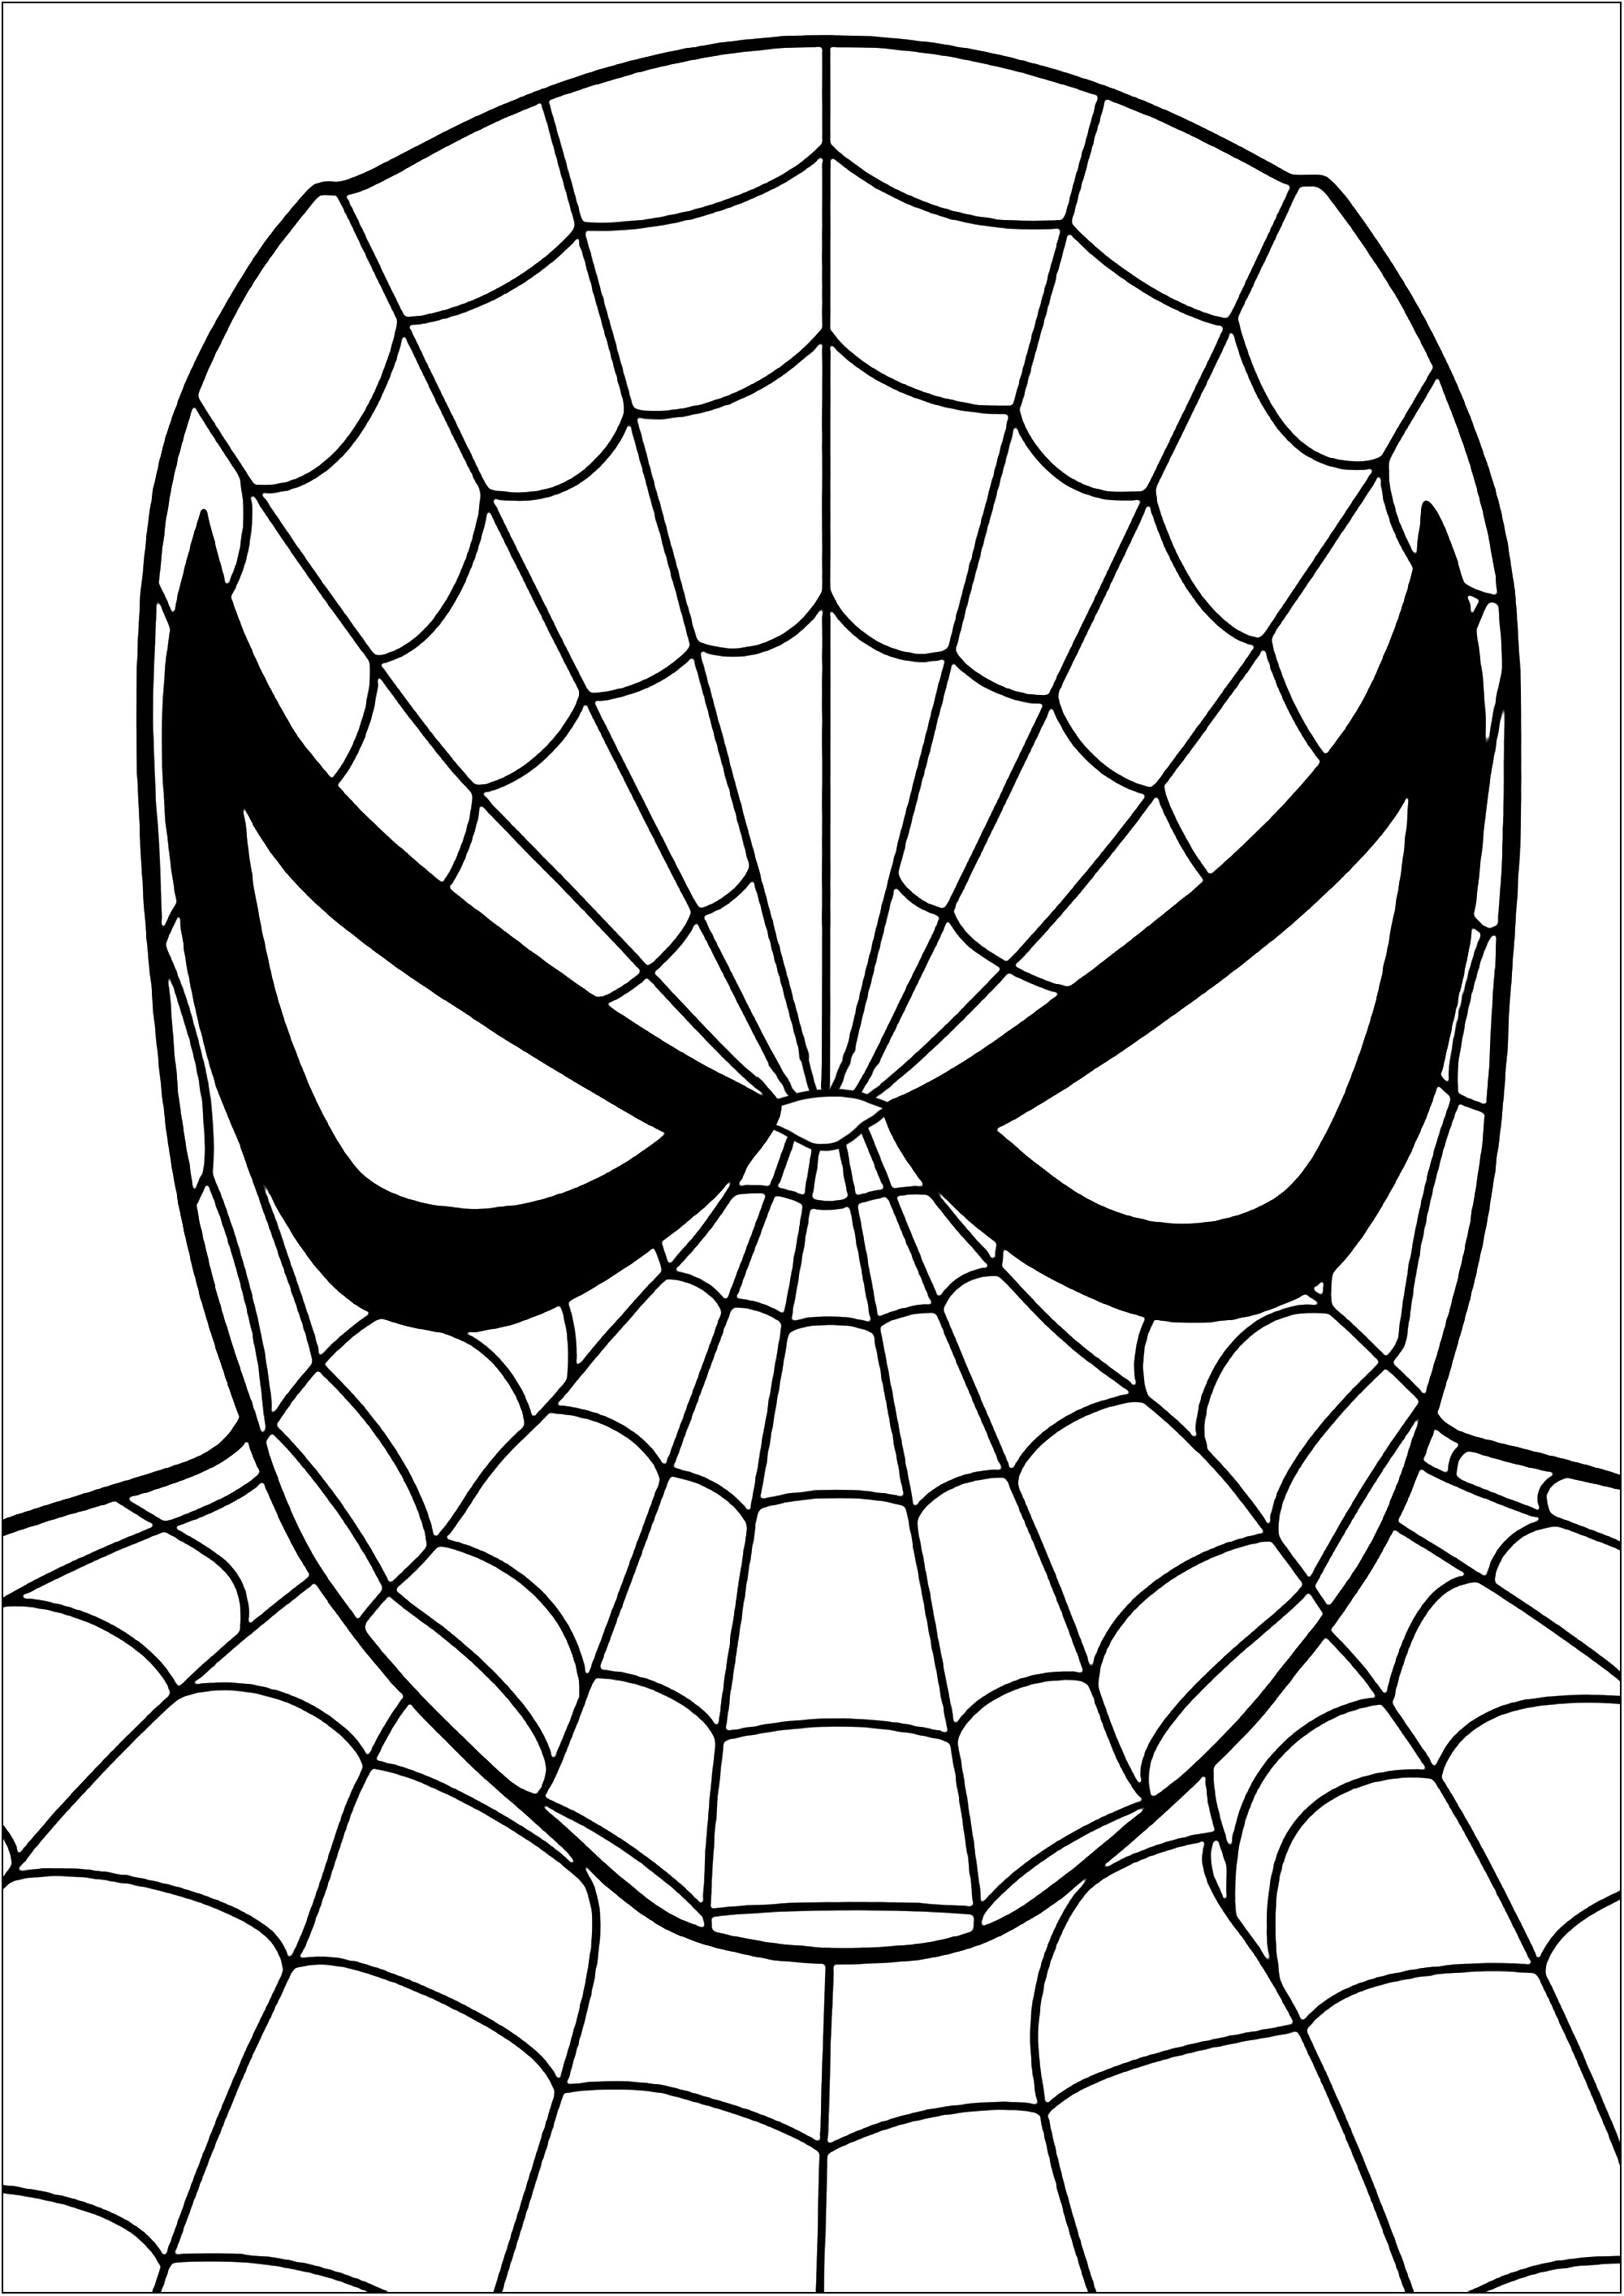 Coloring of the head of Spiderman (aka Peter Parker). Color each part of these spider webs making up this Spiderman costume